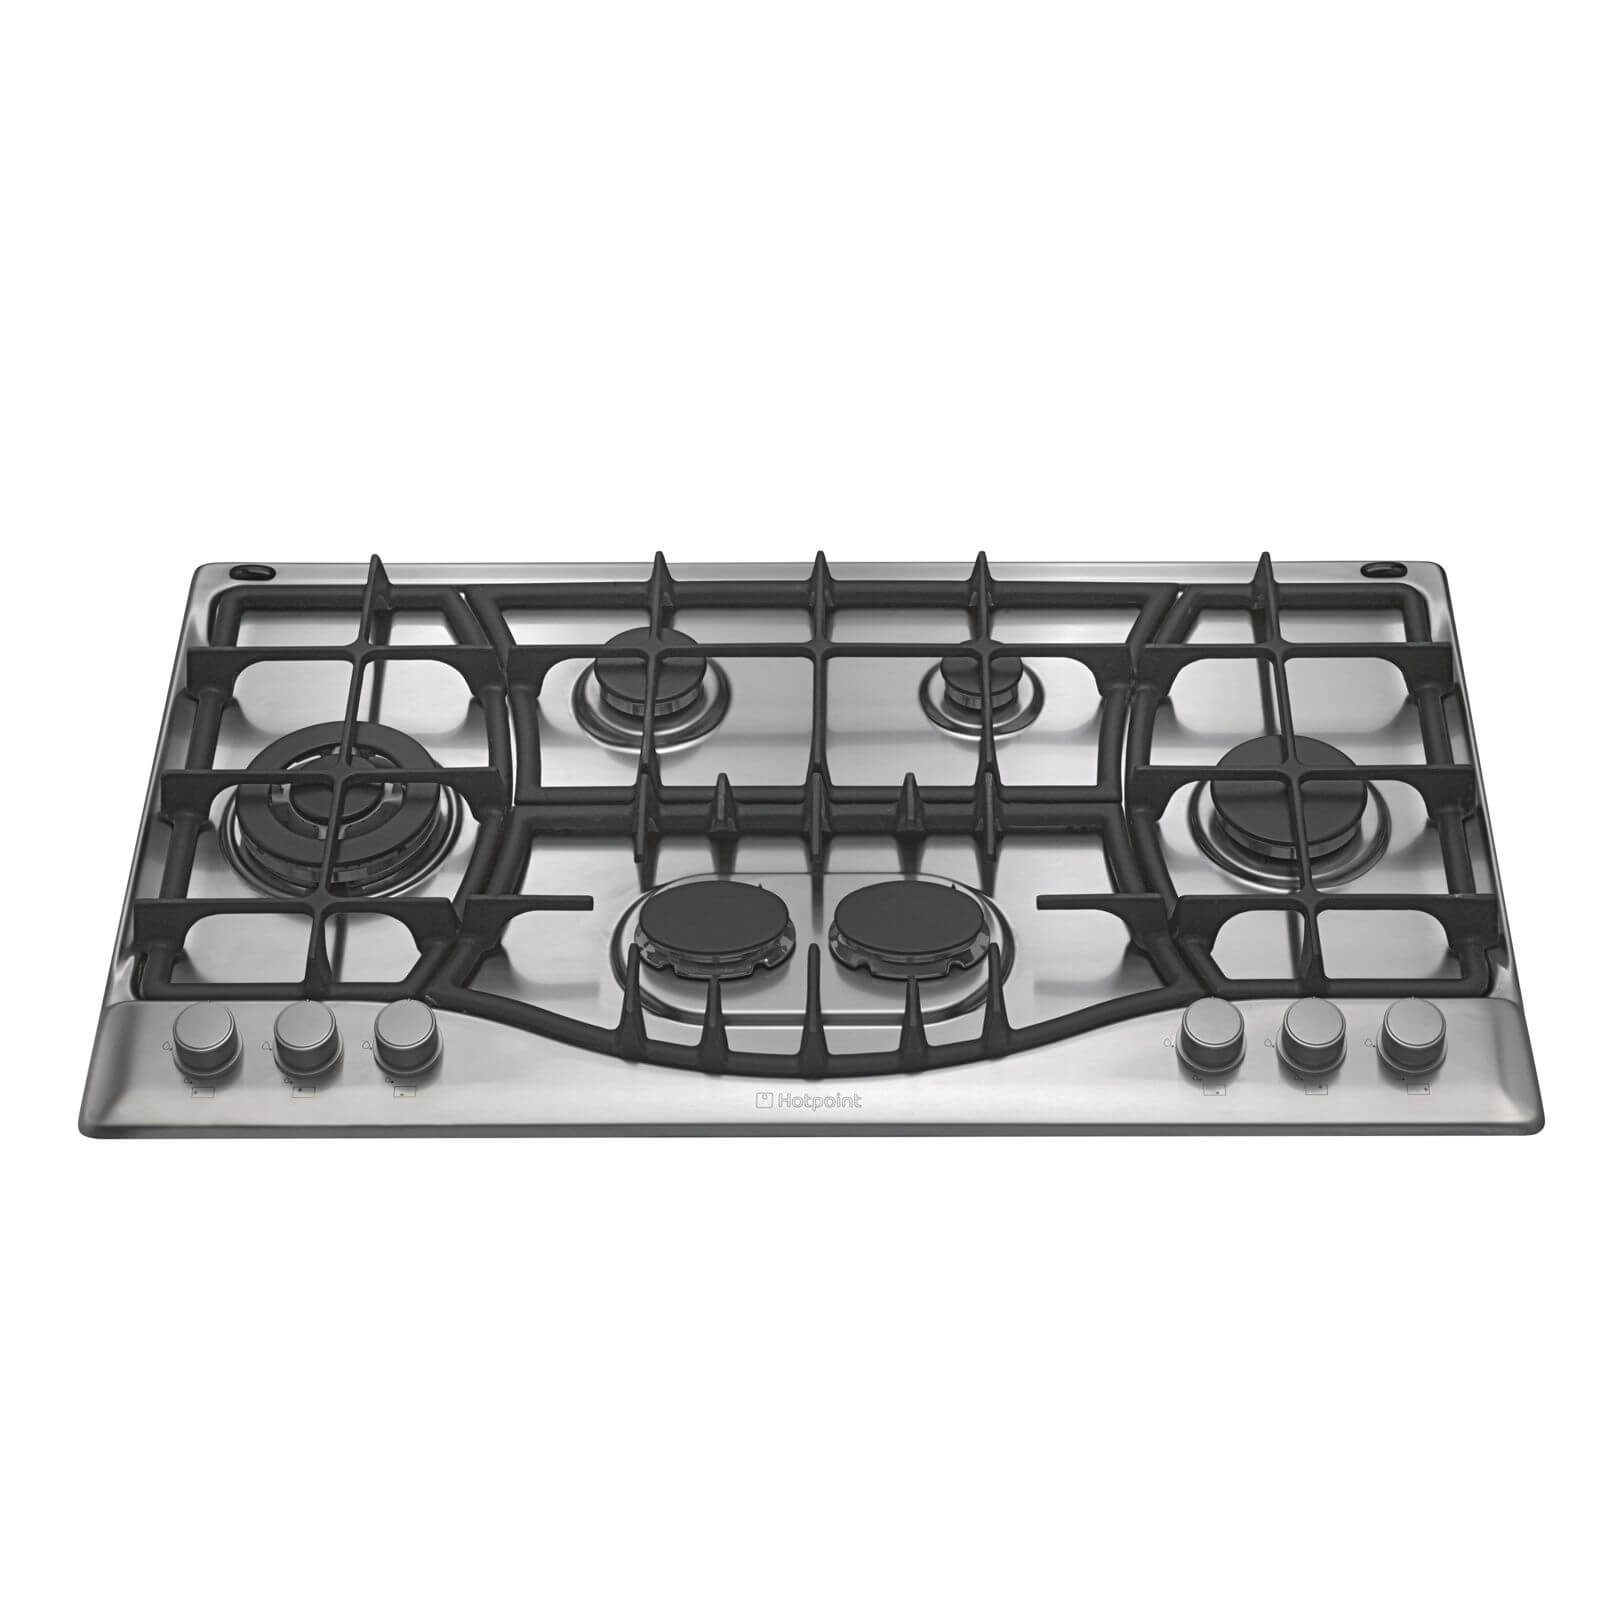 Hotpoint PHC 961 TS/IX/H Built-in Gas Hob - Stainless Steel